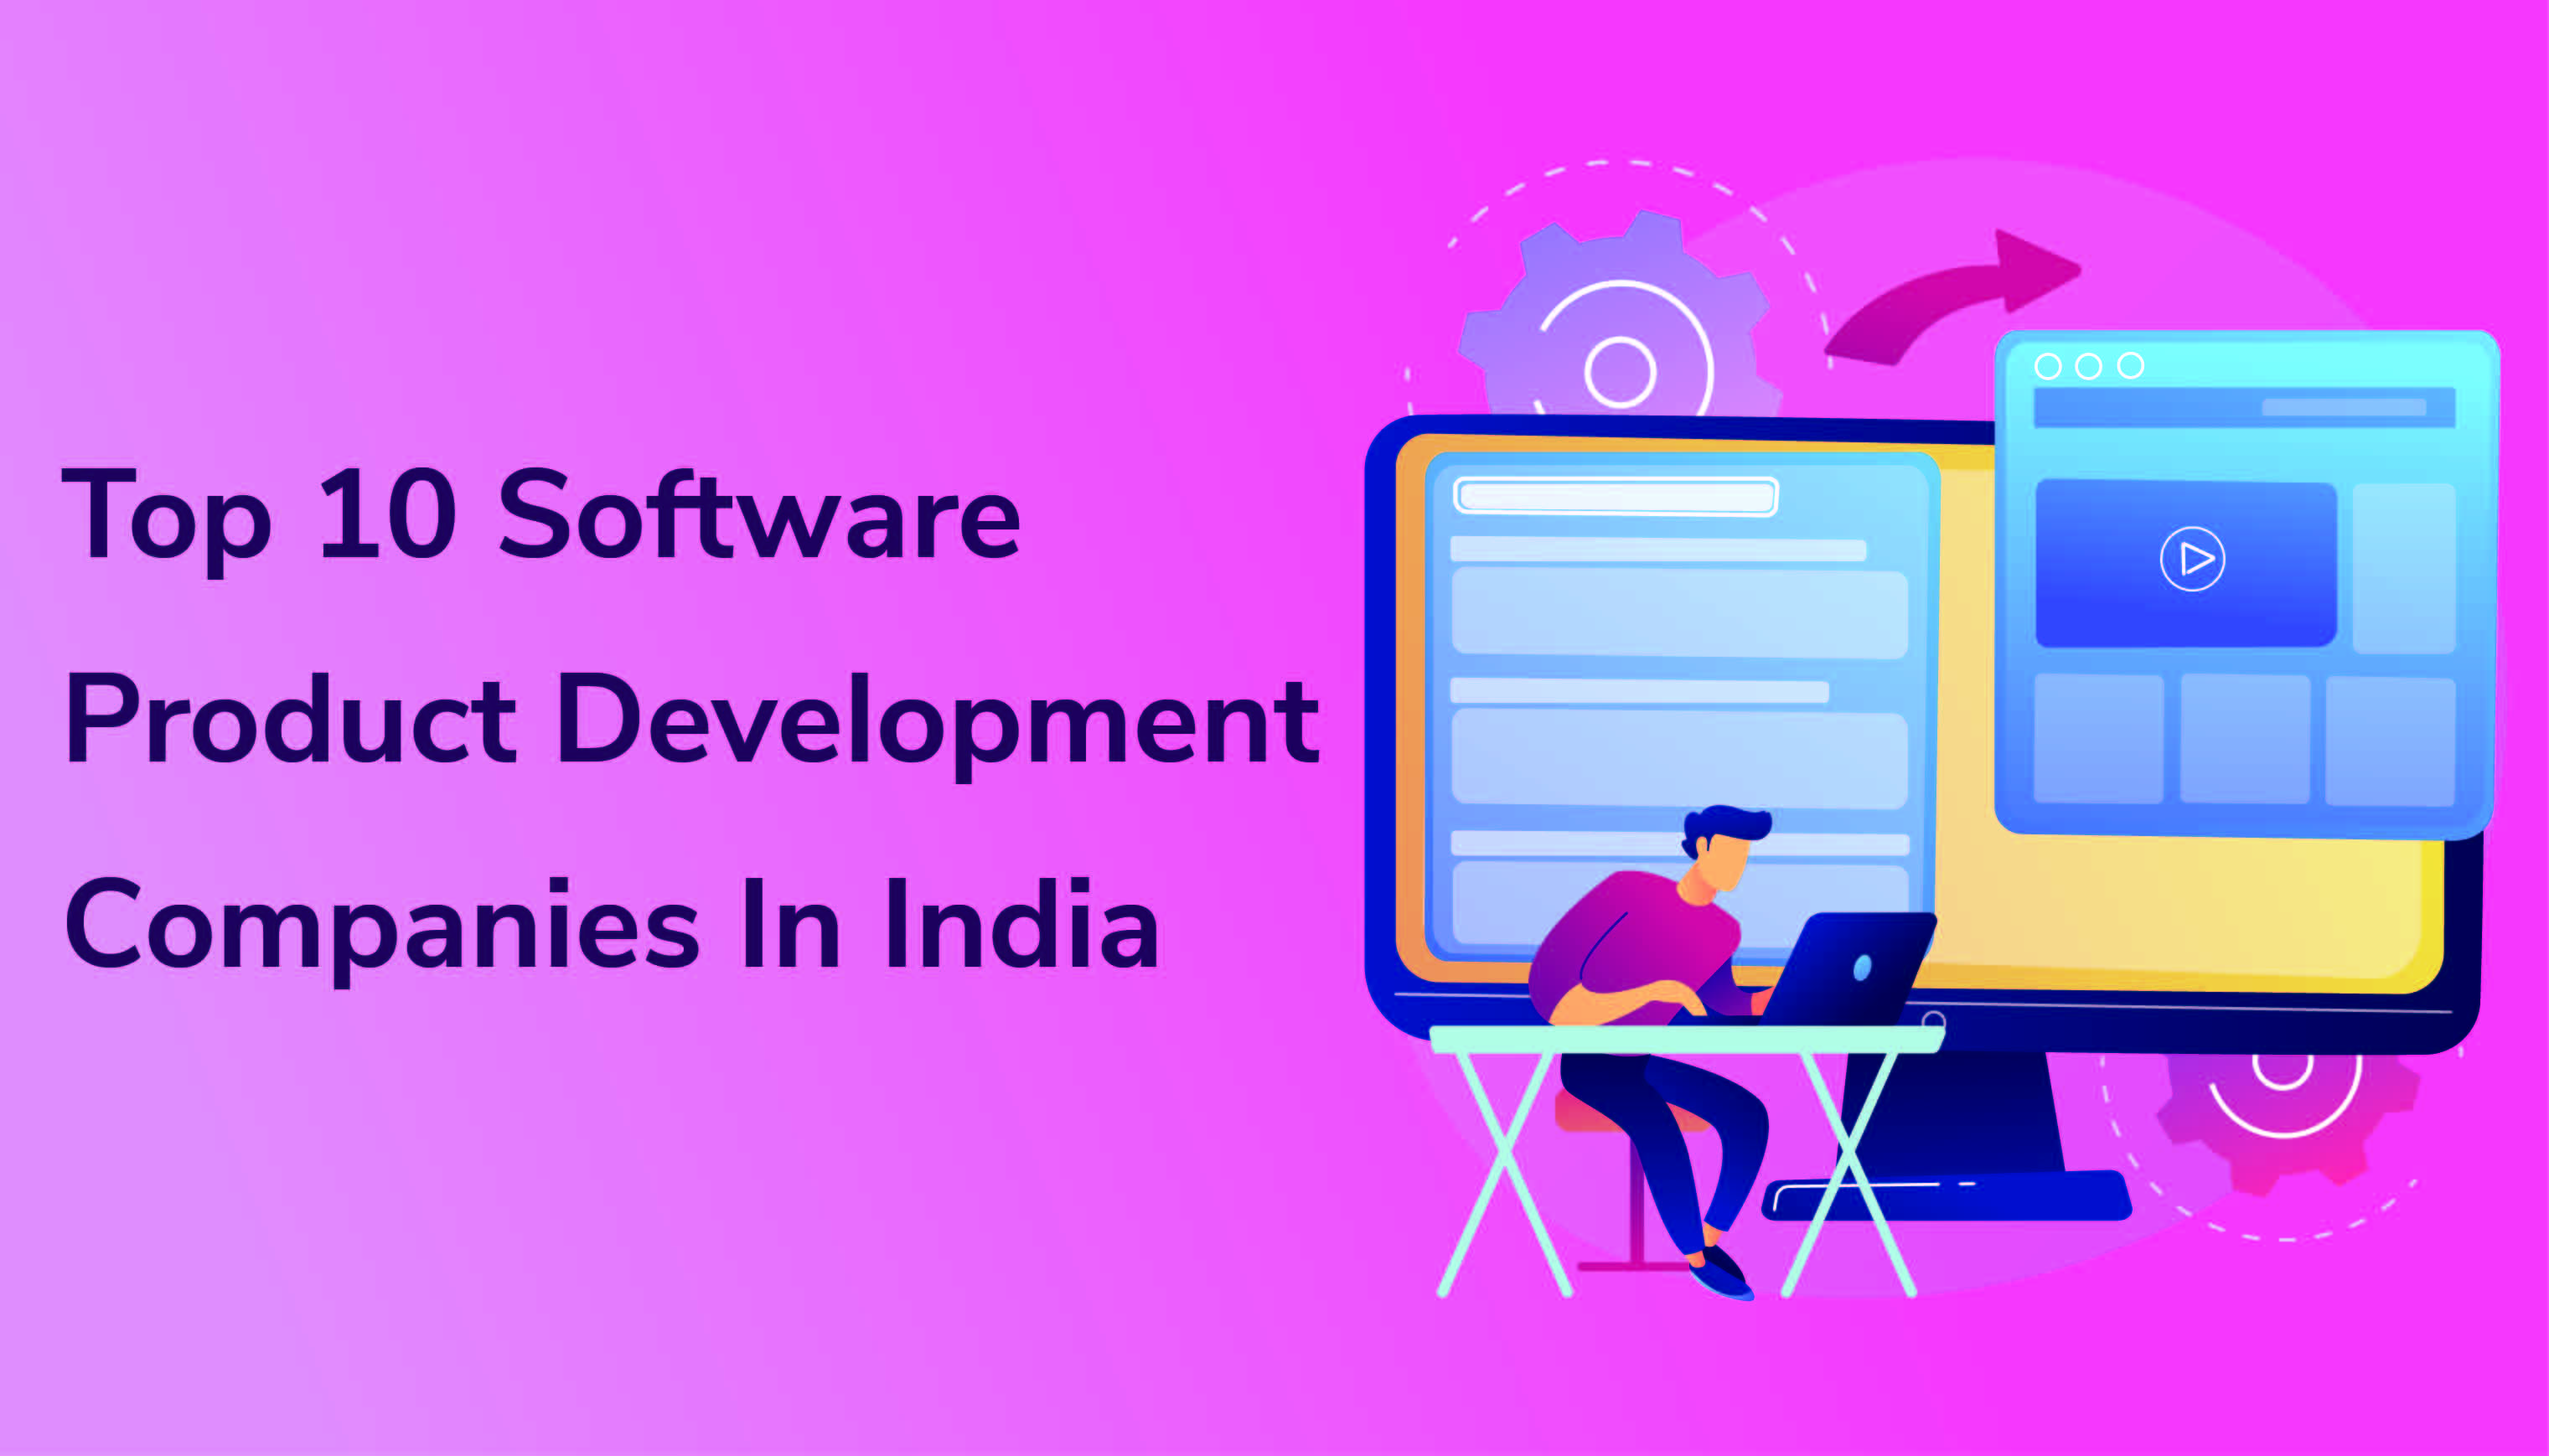 Top 10 Software Product Development Companies In India